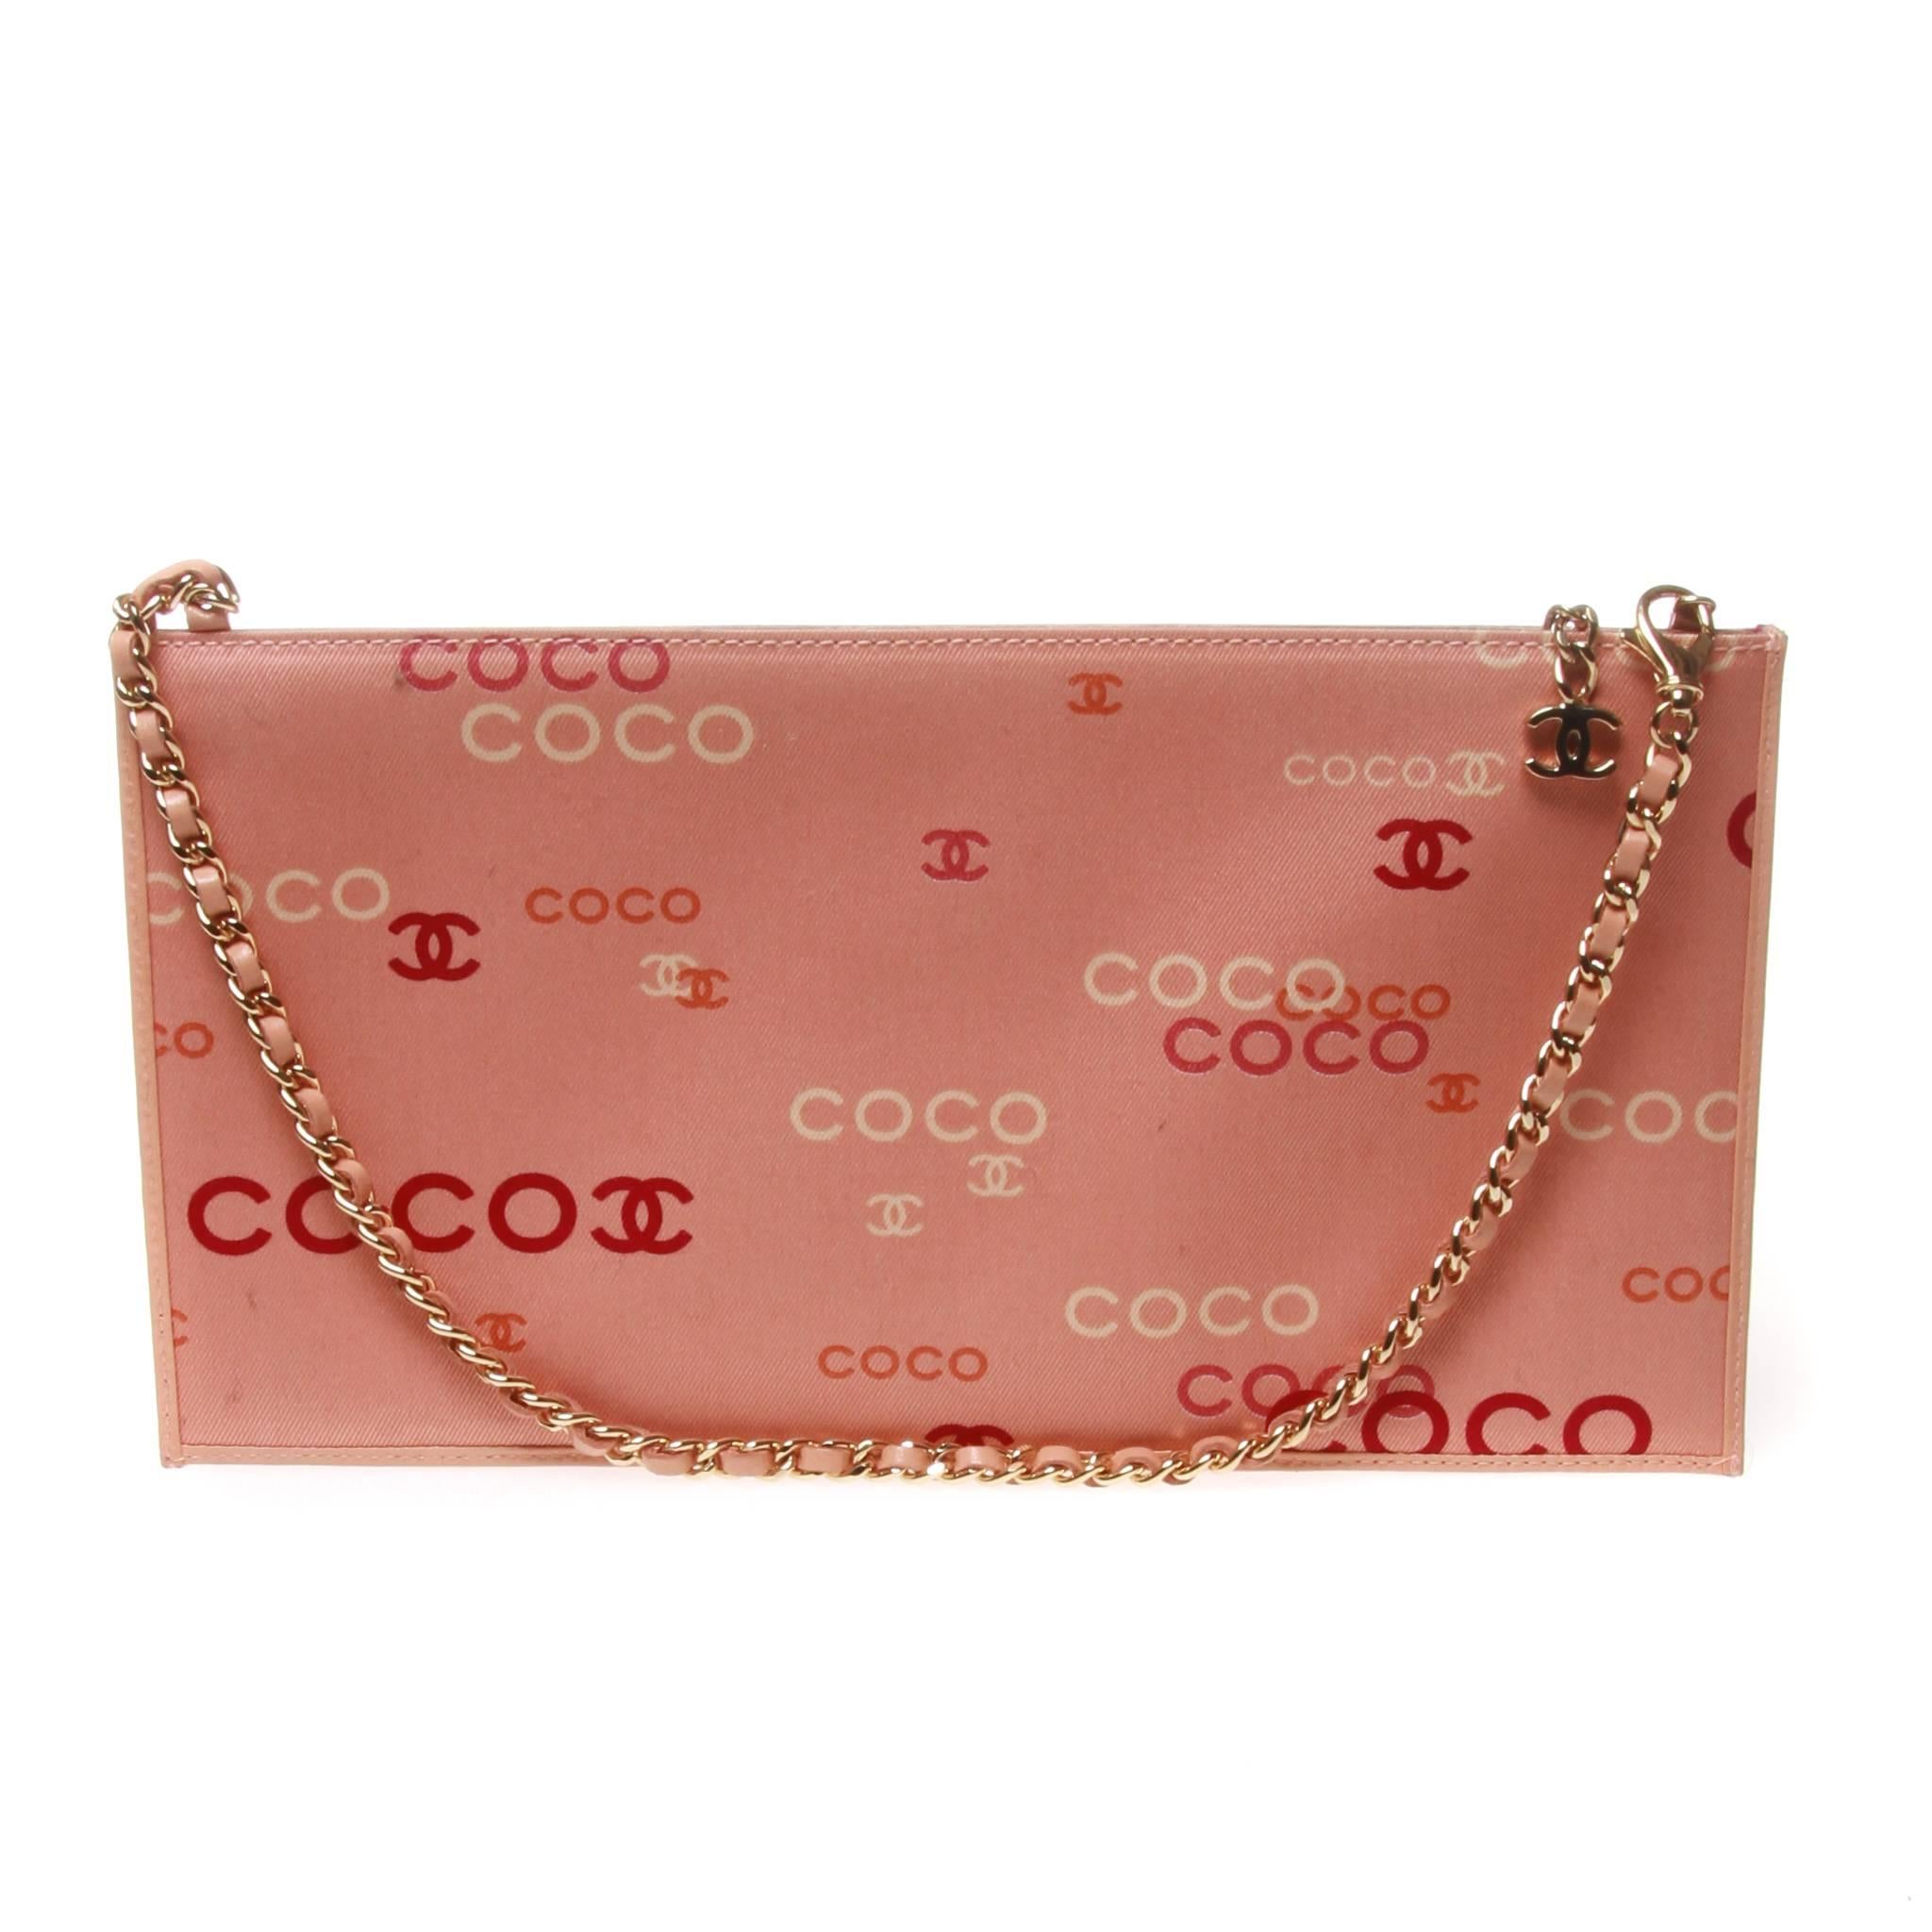 Chanel envelope pouch with coco graphic